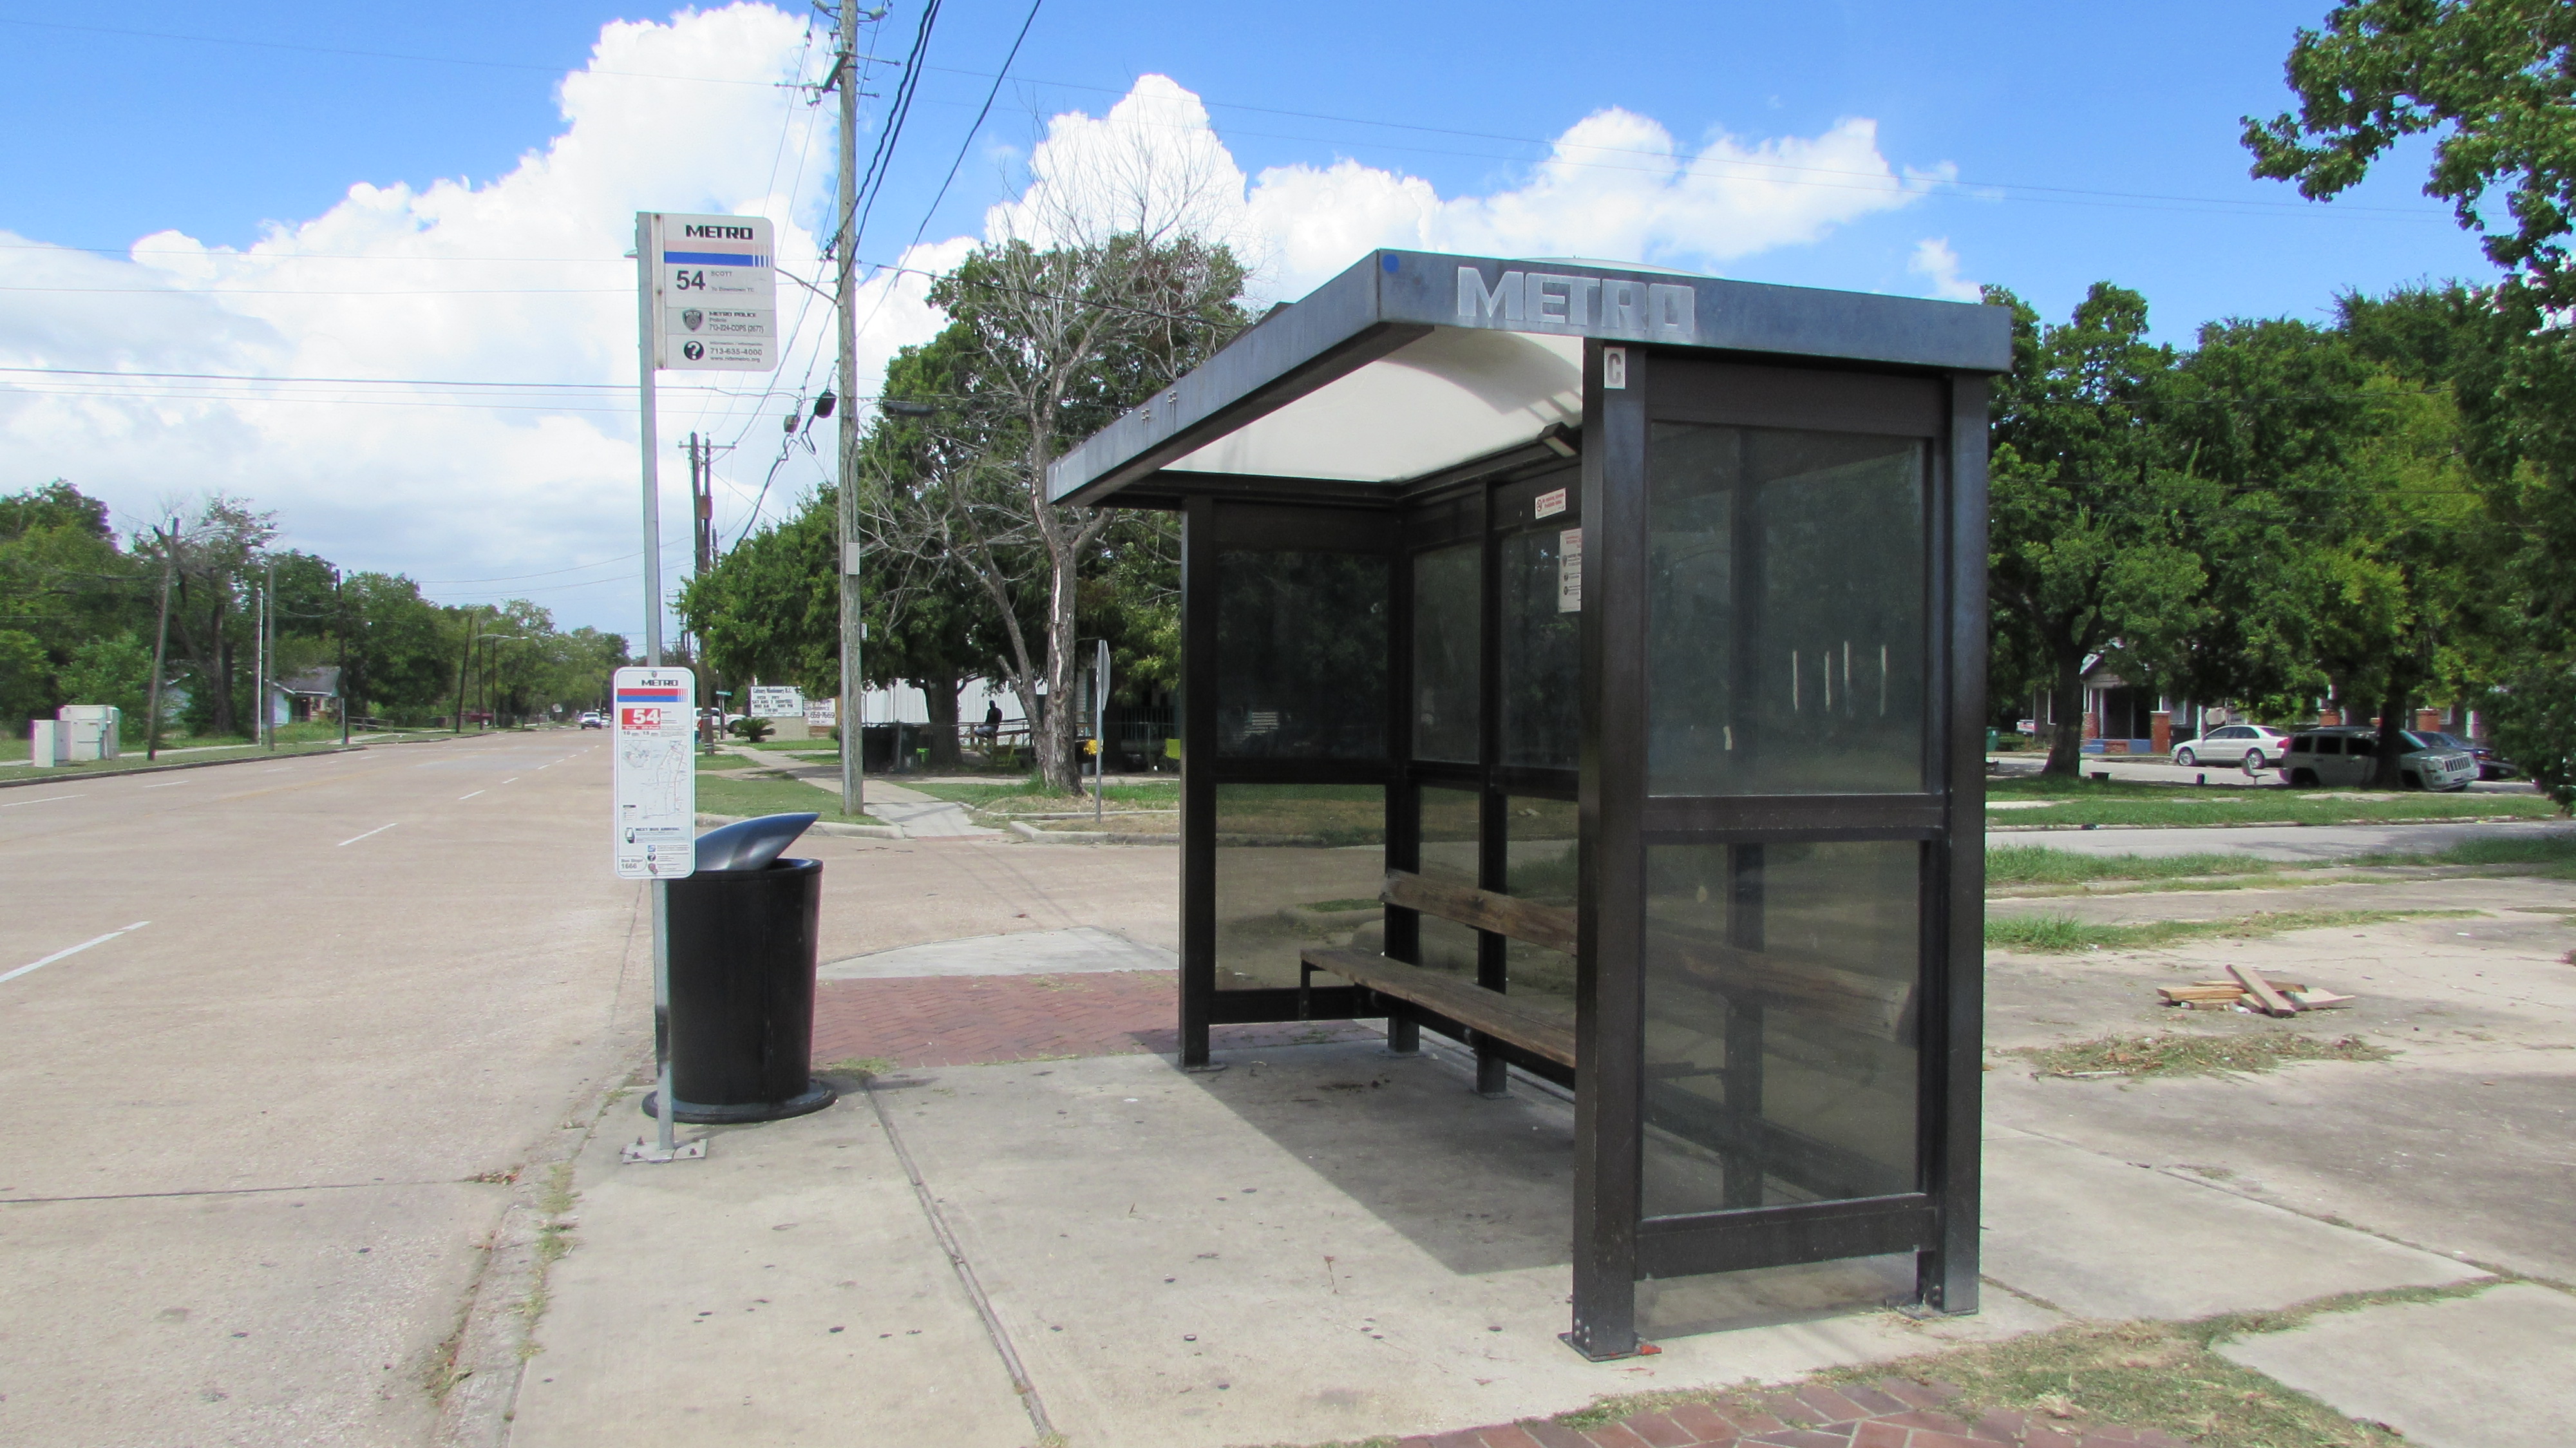 METRO Board Votes To Spend $21 Million On Cleaning Bus Stops – Houston Public Media